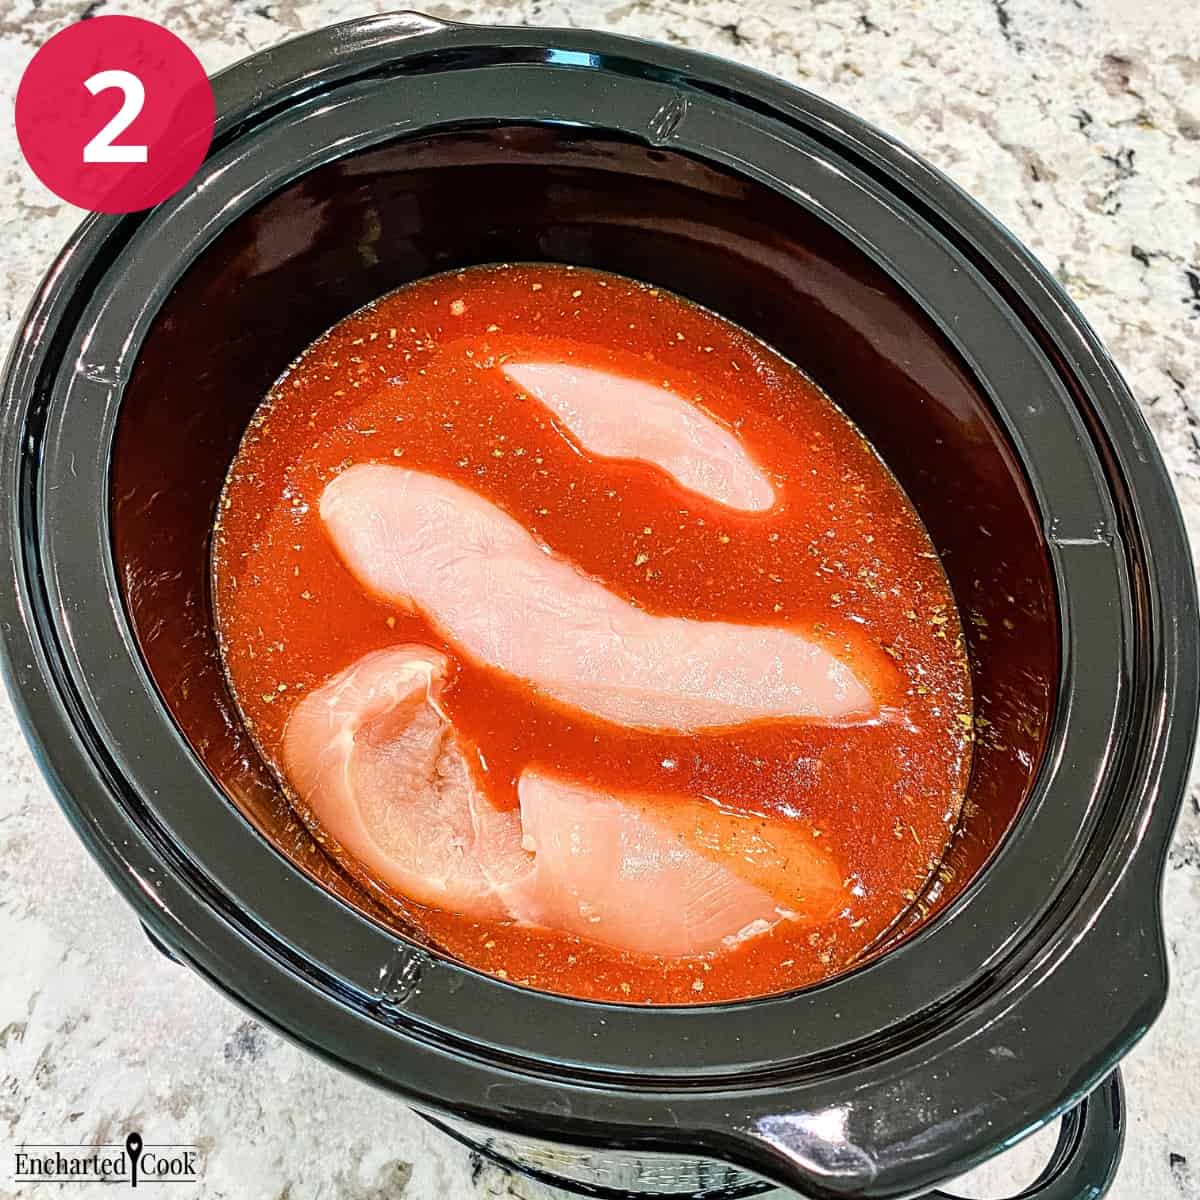 Process Photo 2 - Raw chicken breasts are submerged into the red enchilada sauce in a large crock pot.